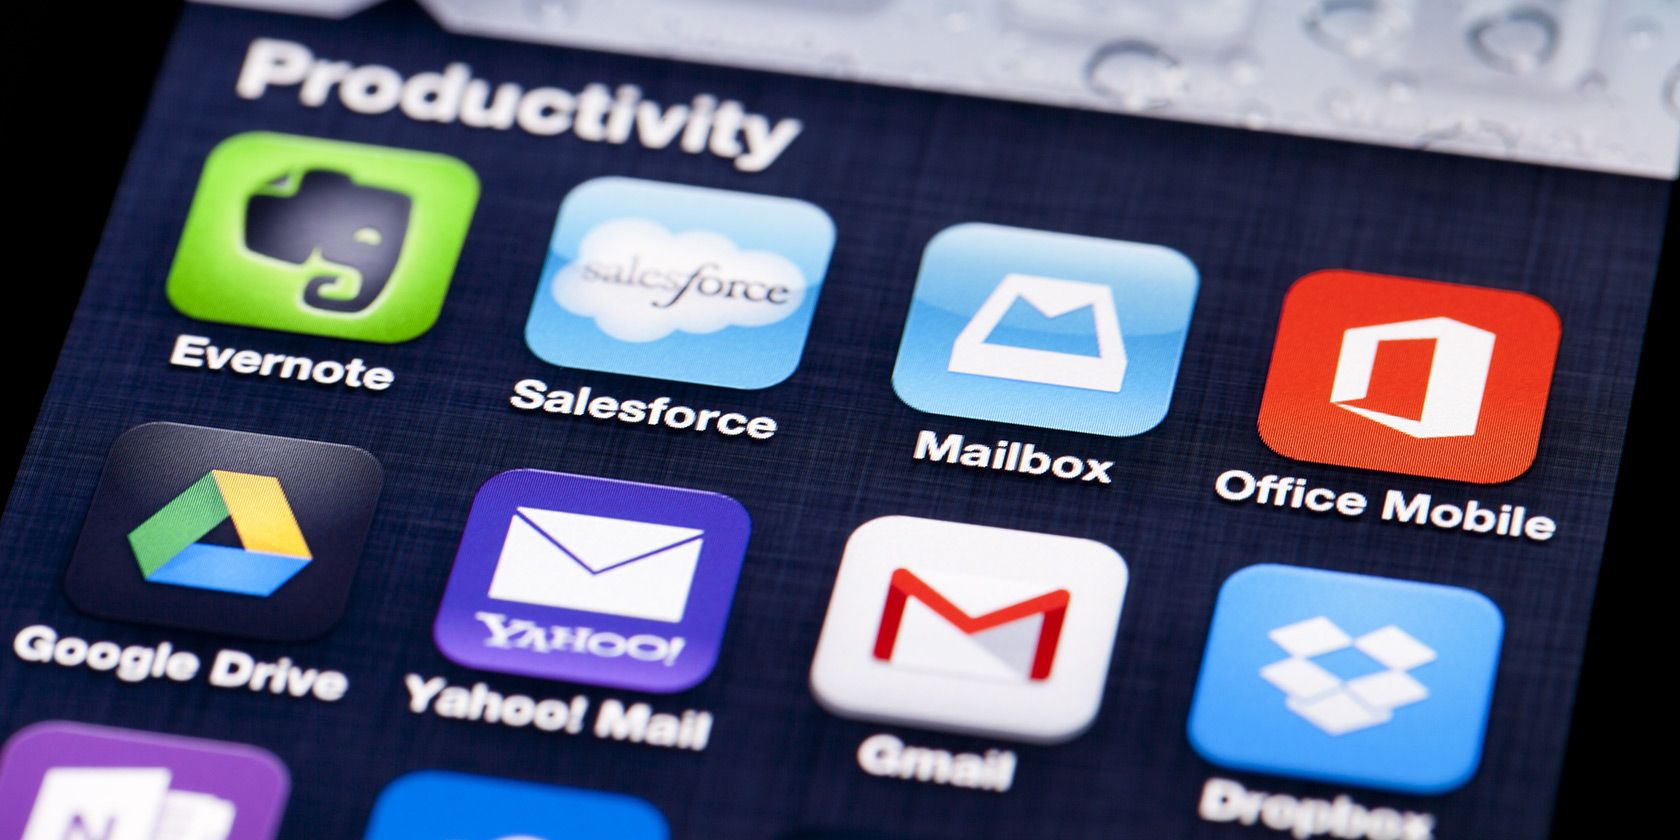 Download the Right Productivity App Every Time with This Simple System